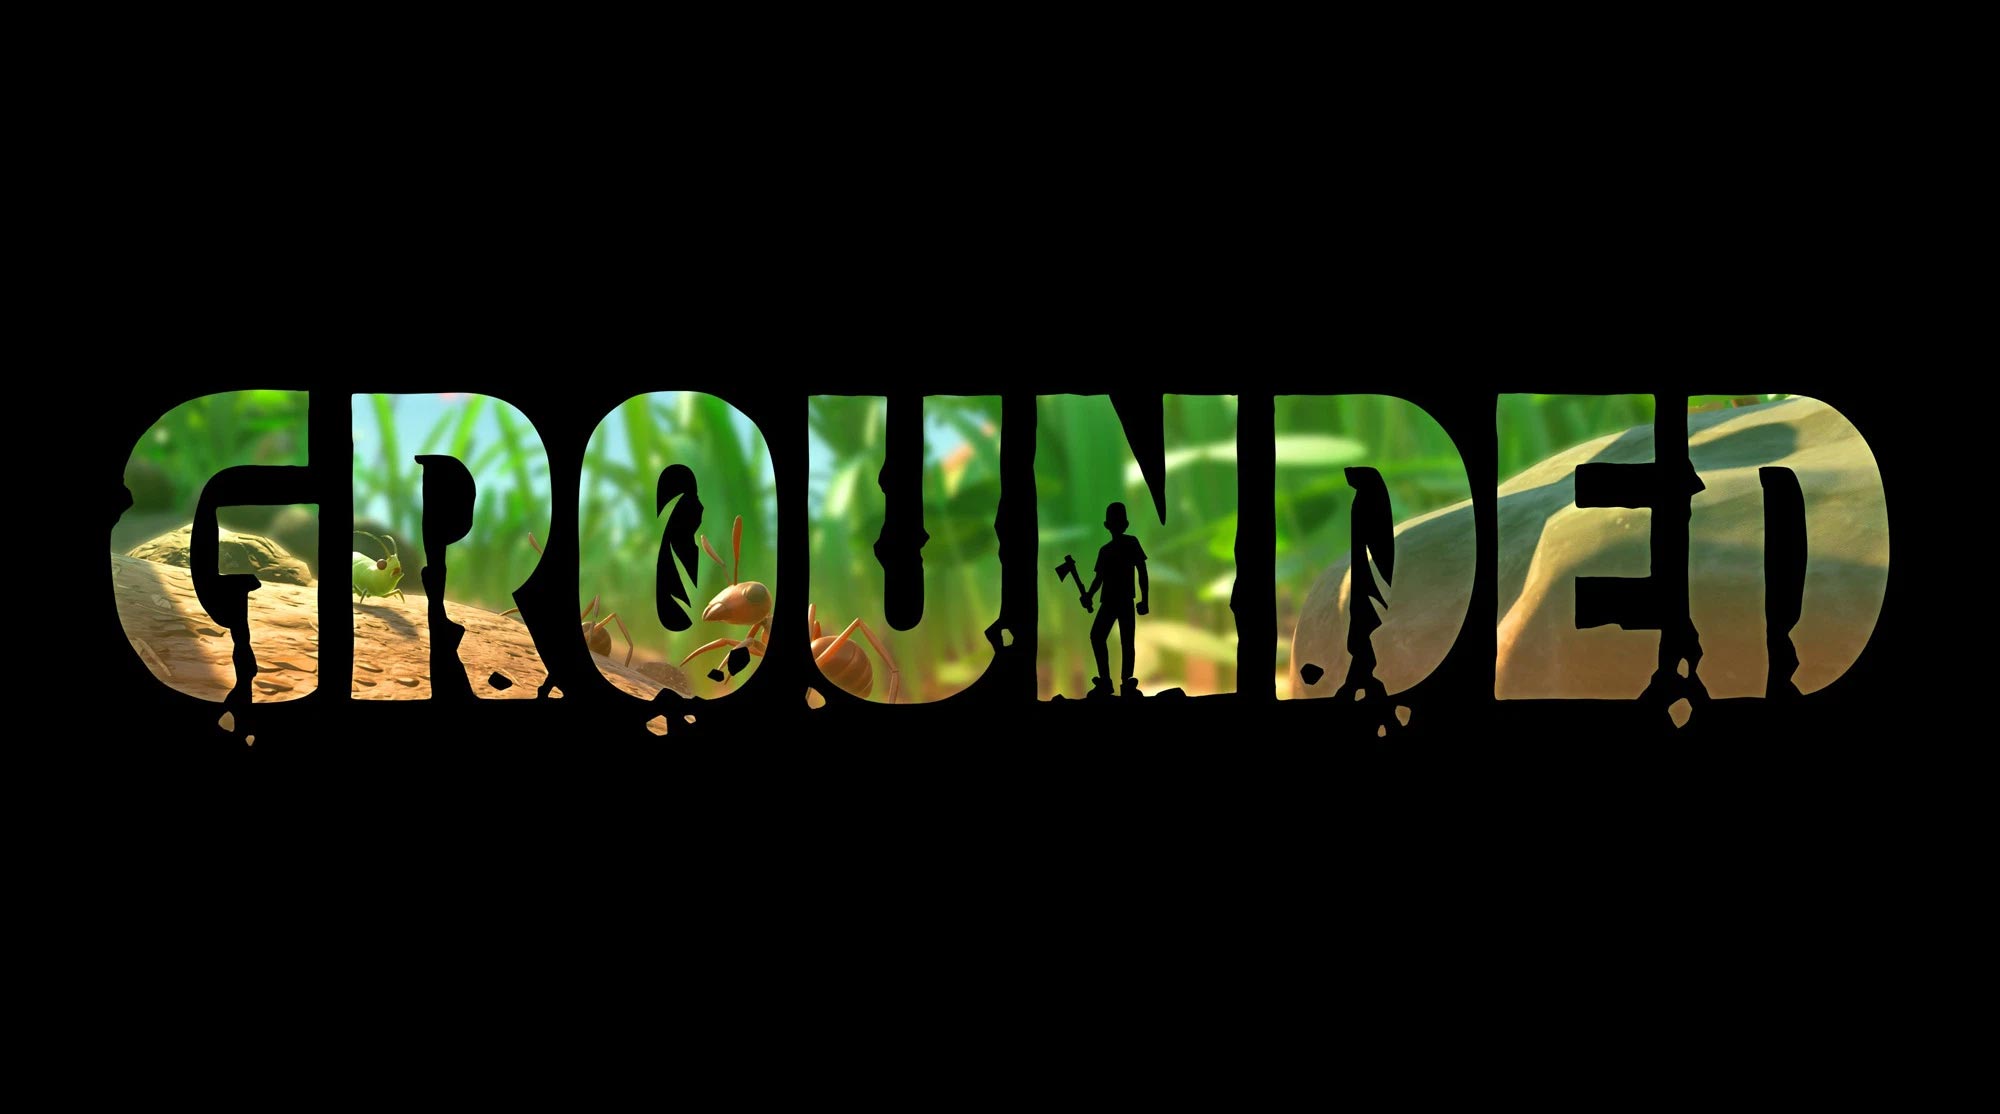 grounded obsidian download free